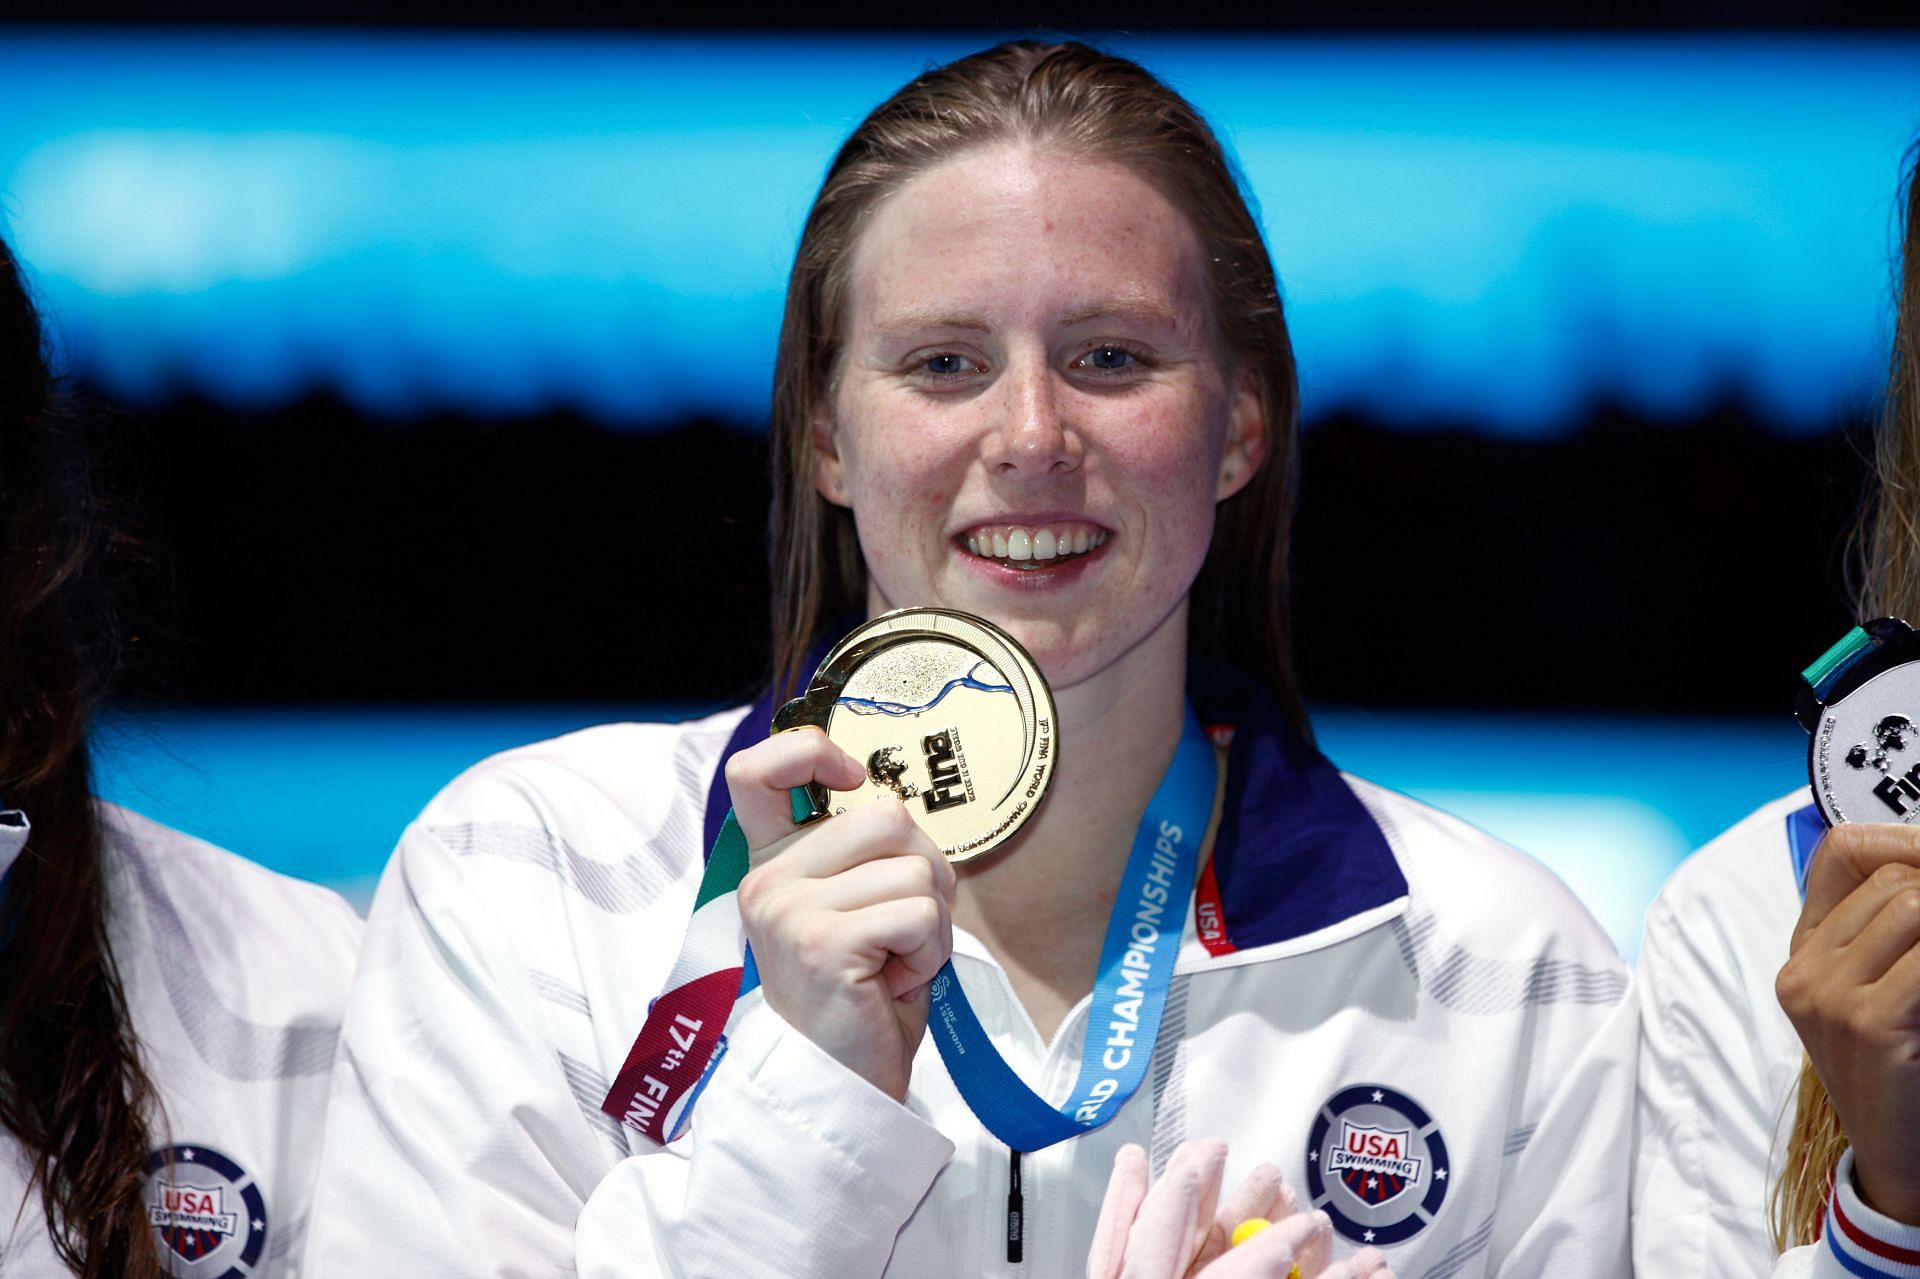 Lilly King celebrates her gold medal and a new World Record of 29.40 in the Women&#039;s 50m Breaststroke Final at the Budapest 2017 FINA World Championships on July 30, 2017. (Photo by Adam Pretty/Getty Images)